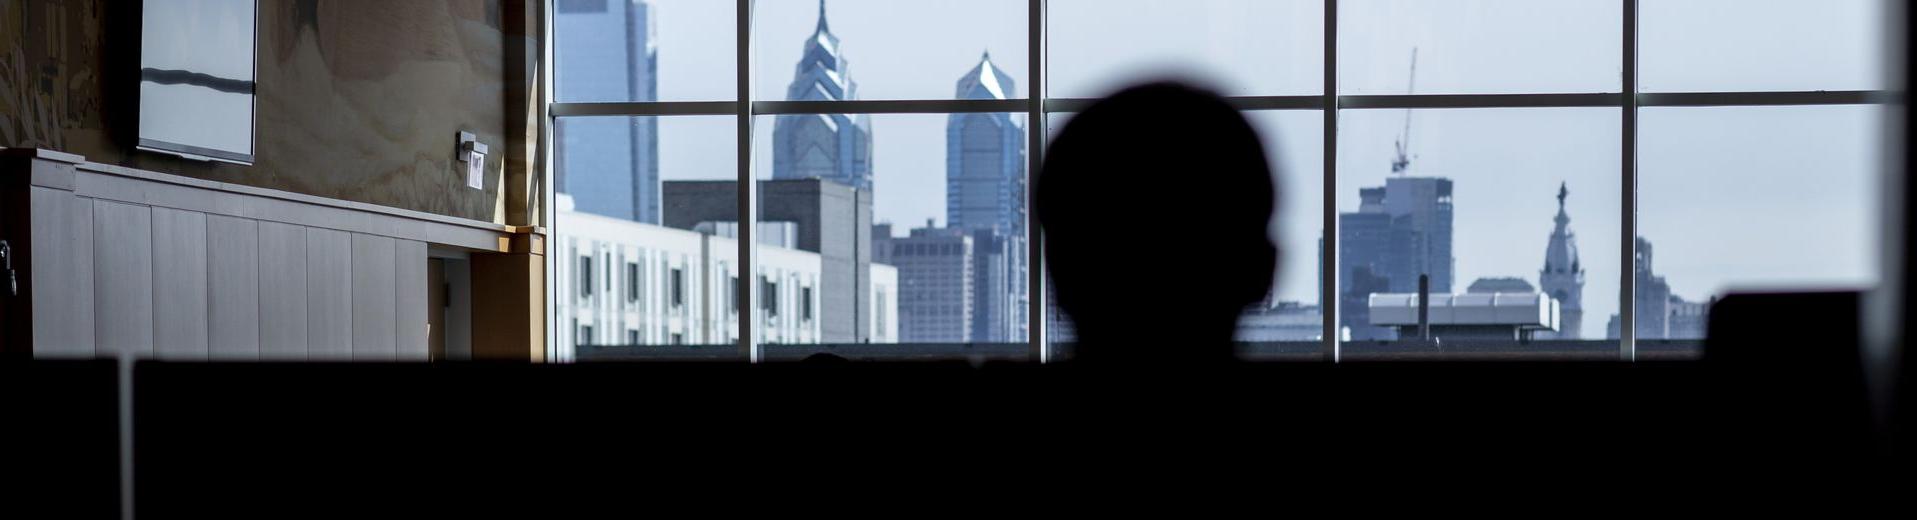 A student looks at the Philadelphia skyline through the windows of a building at PG电子试玩平台.